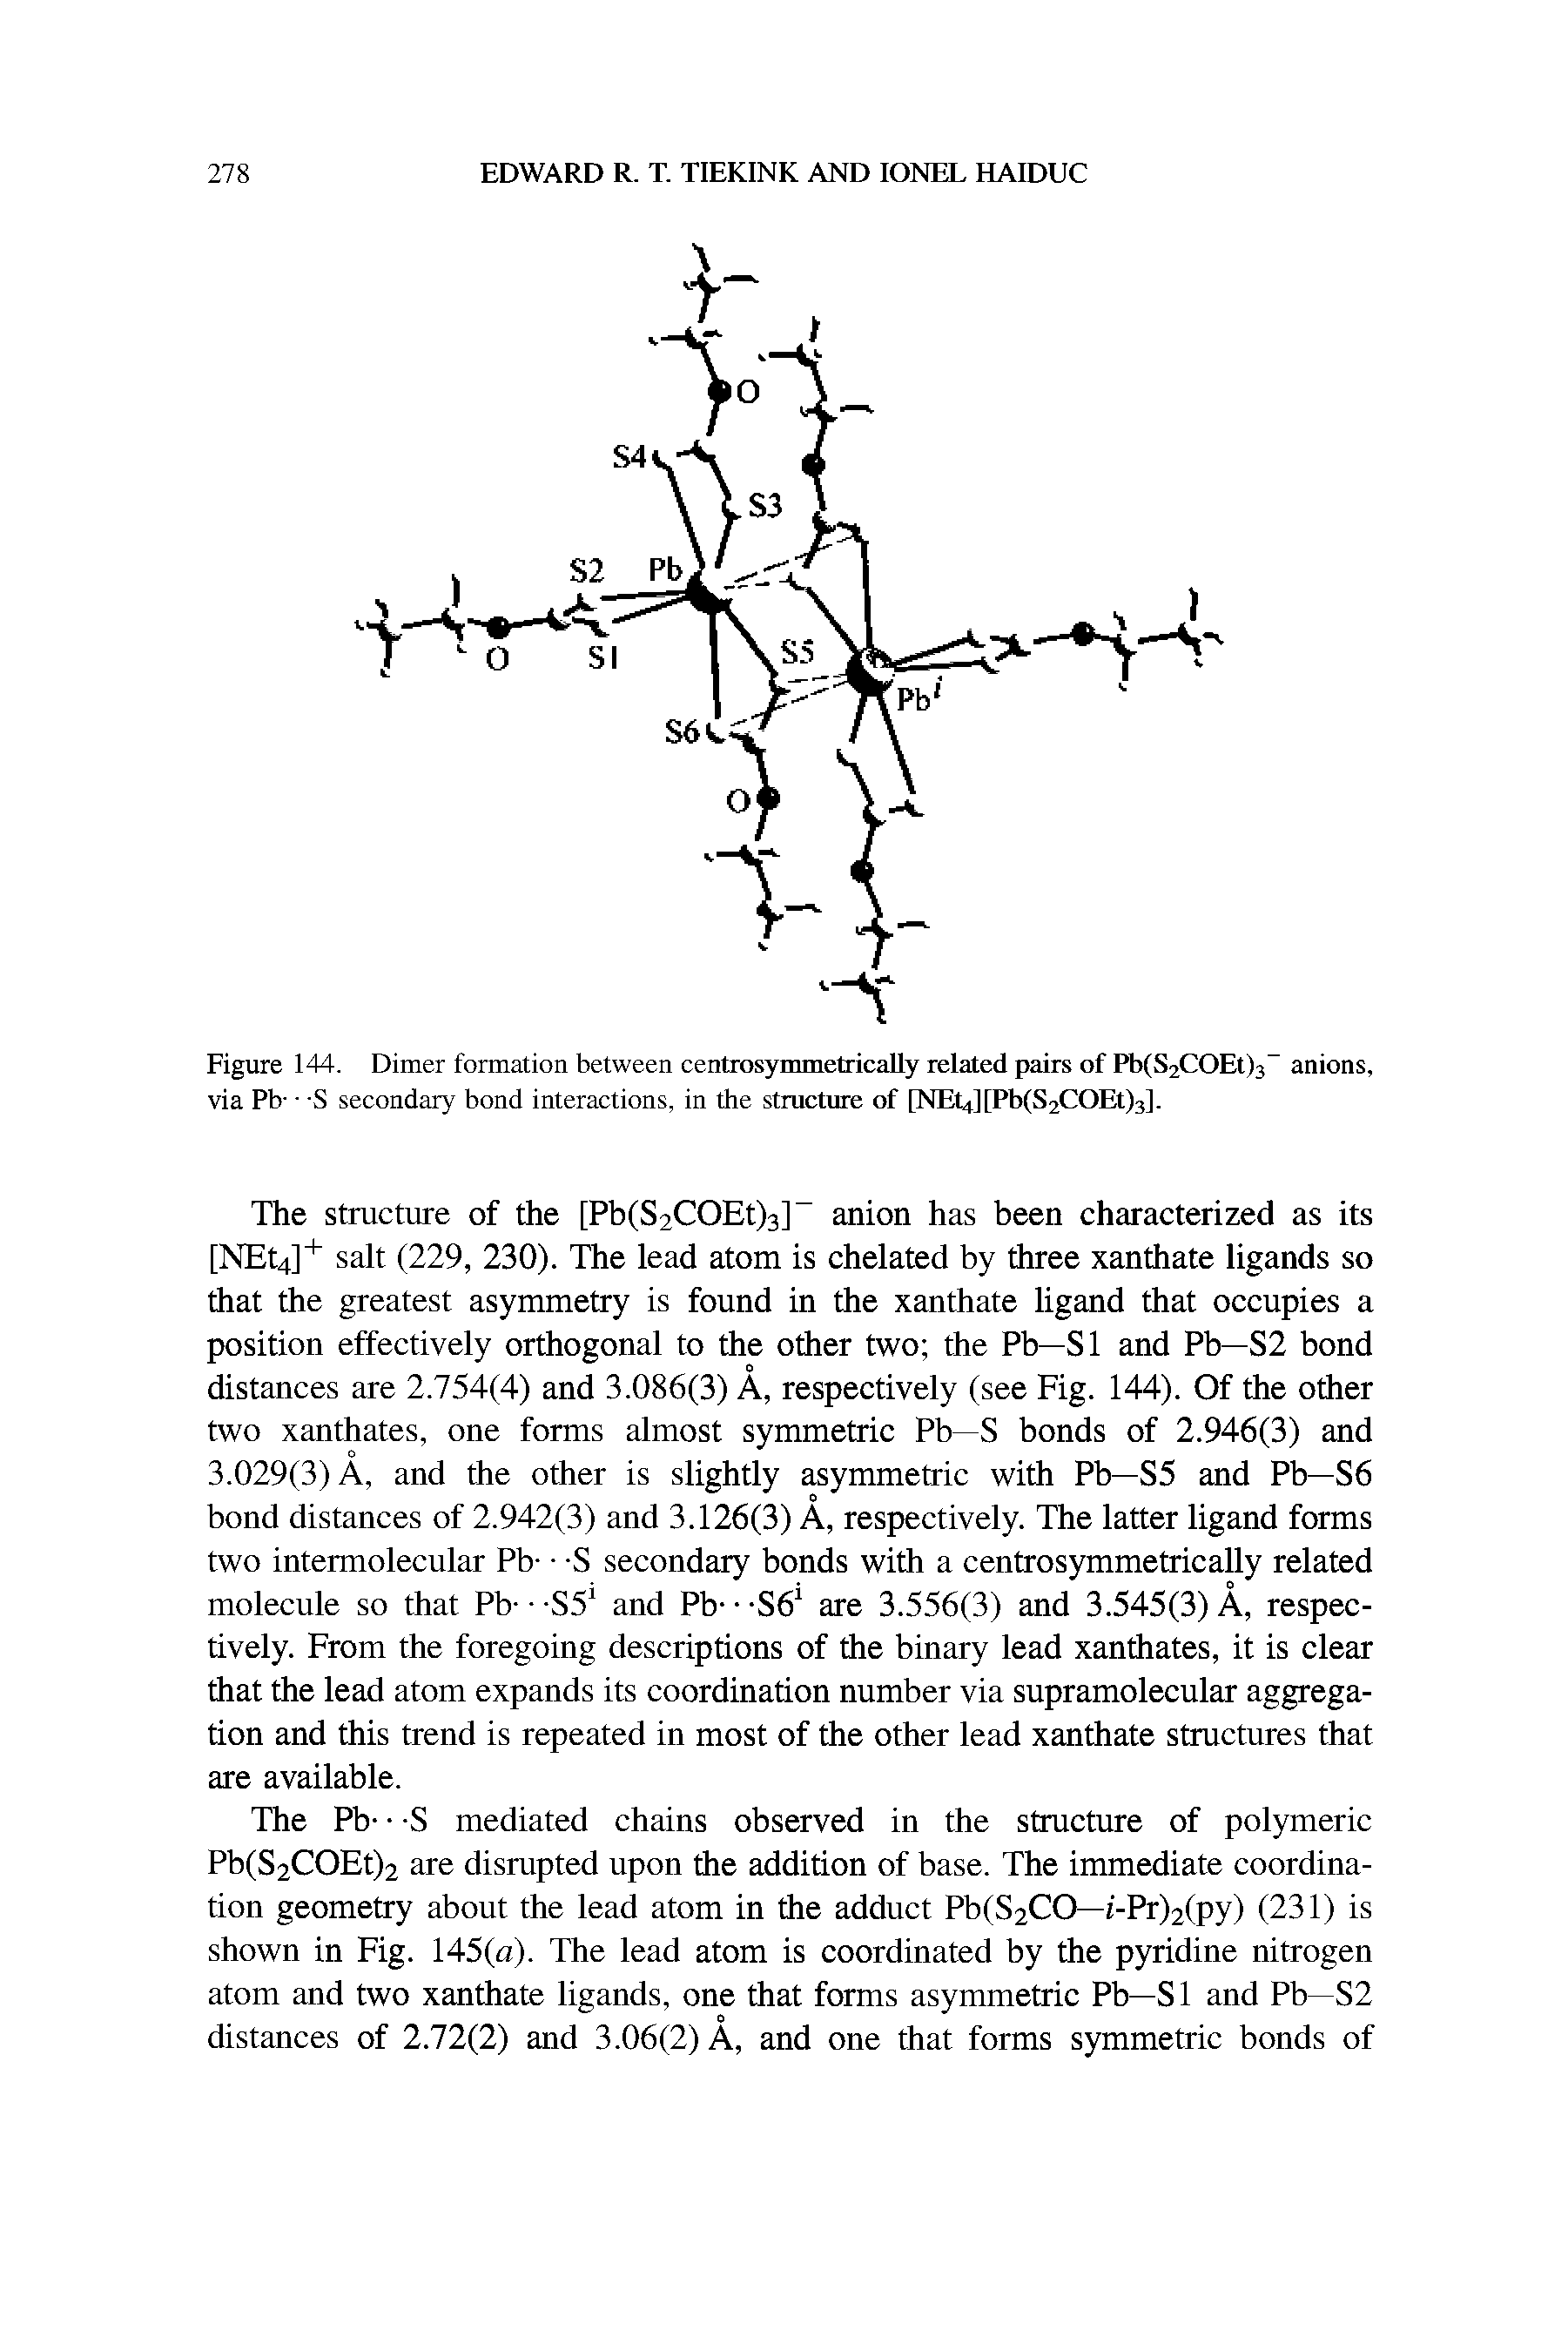 Figure 144. Dimer formation between centrosymmetrically related pairs of Pb(S2COEt)3 anions, via Pb- -S secondary bond interactions, in the structure of [NEt4][Pb(S2COEt)3].